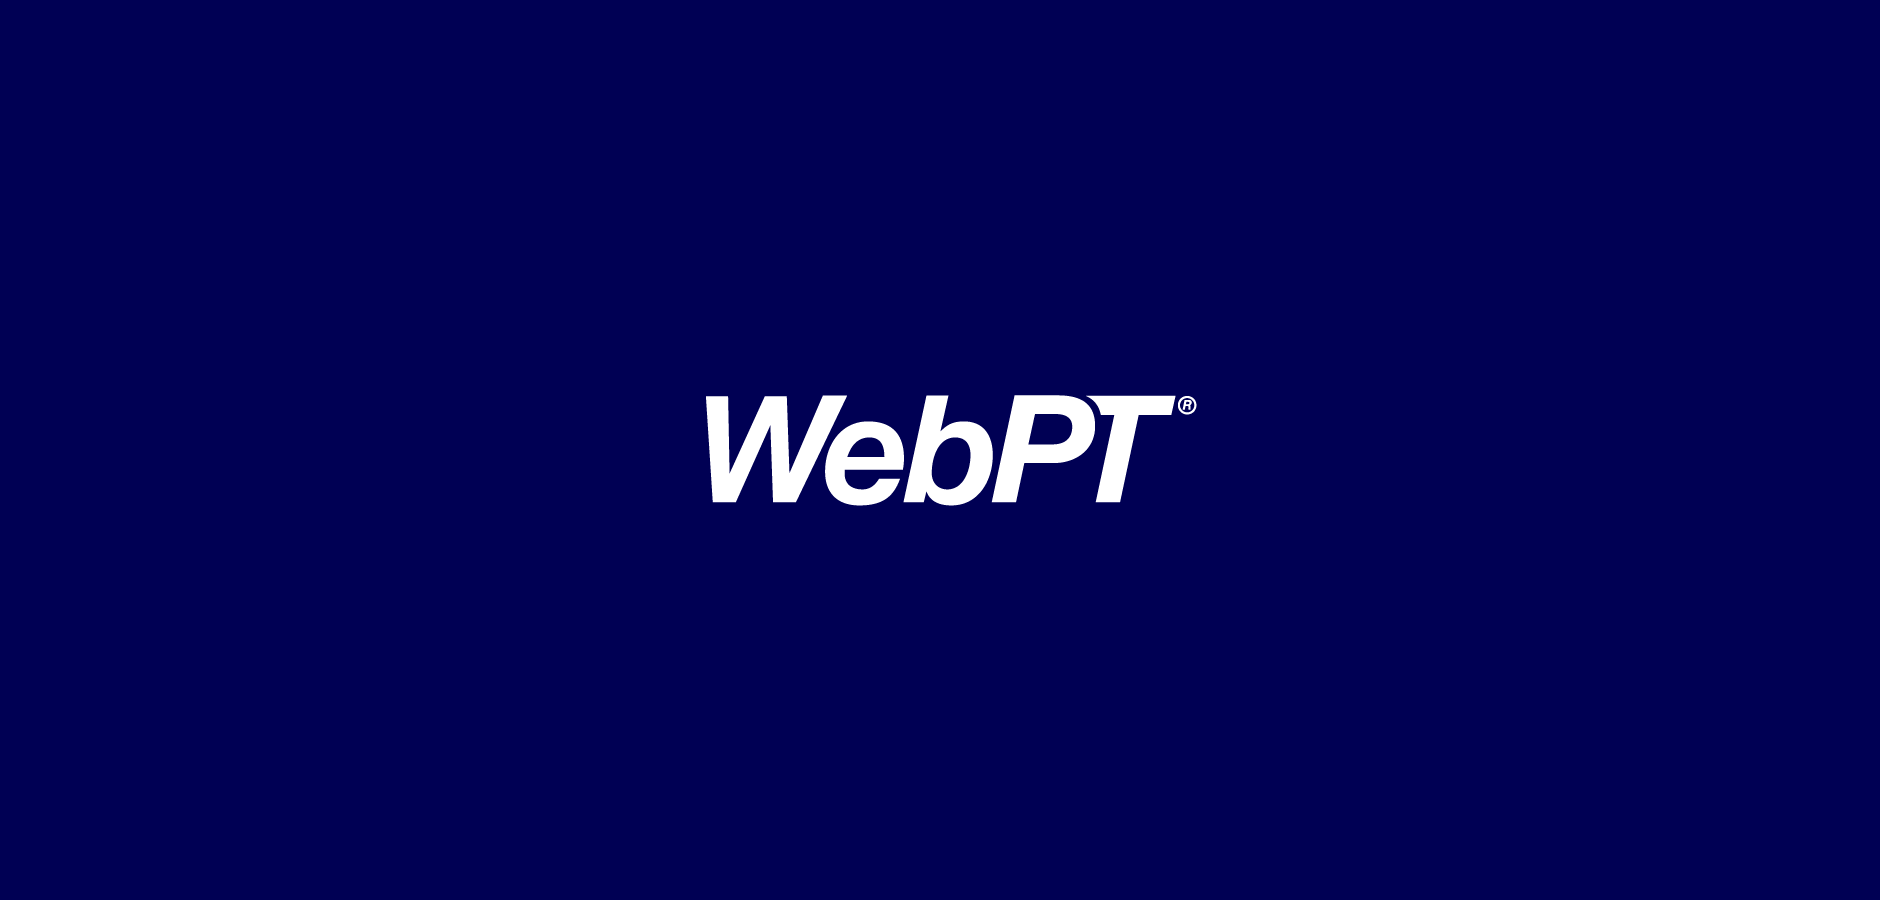 WebPT Welcomes New Board Member and New Product Executive to Accelerate Innovation and Value-Based Care Initiatives